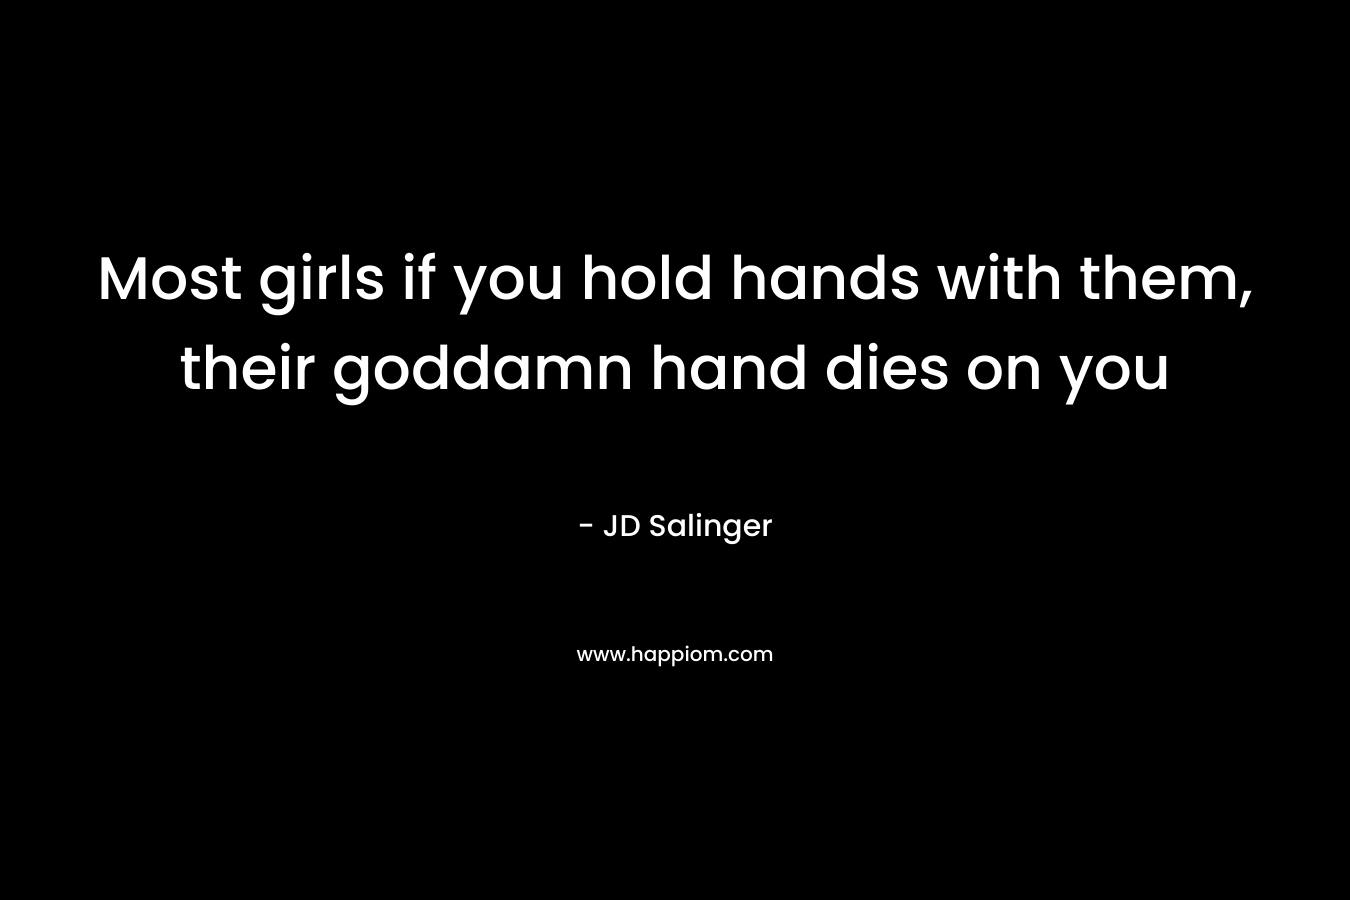 Most girls if you hold hands with them, their goddamn hand dies on you – JD Salinger